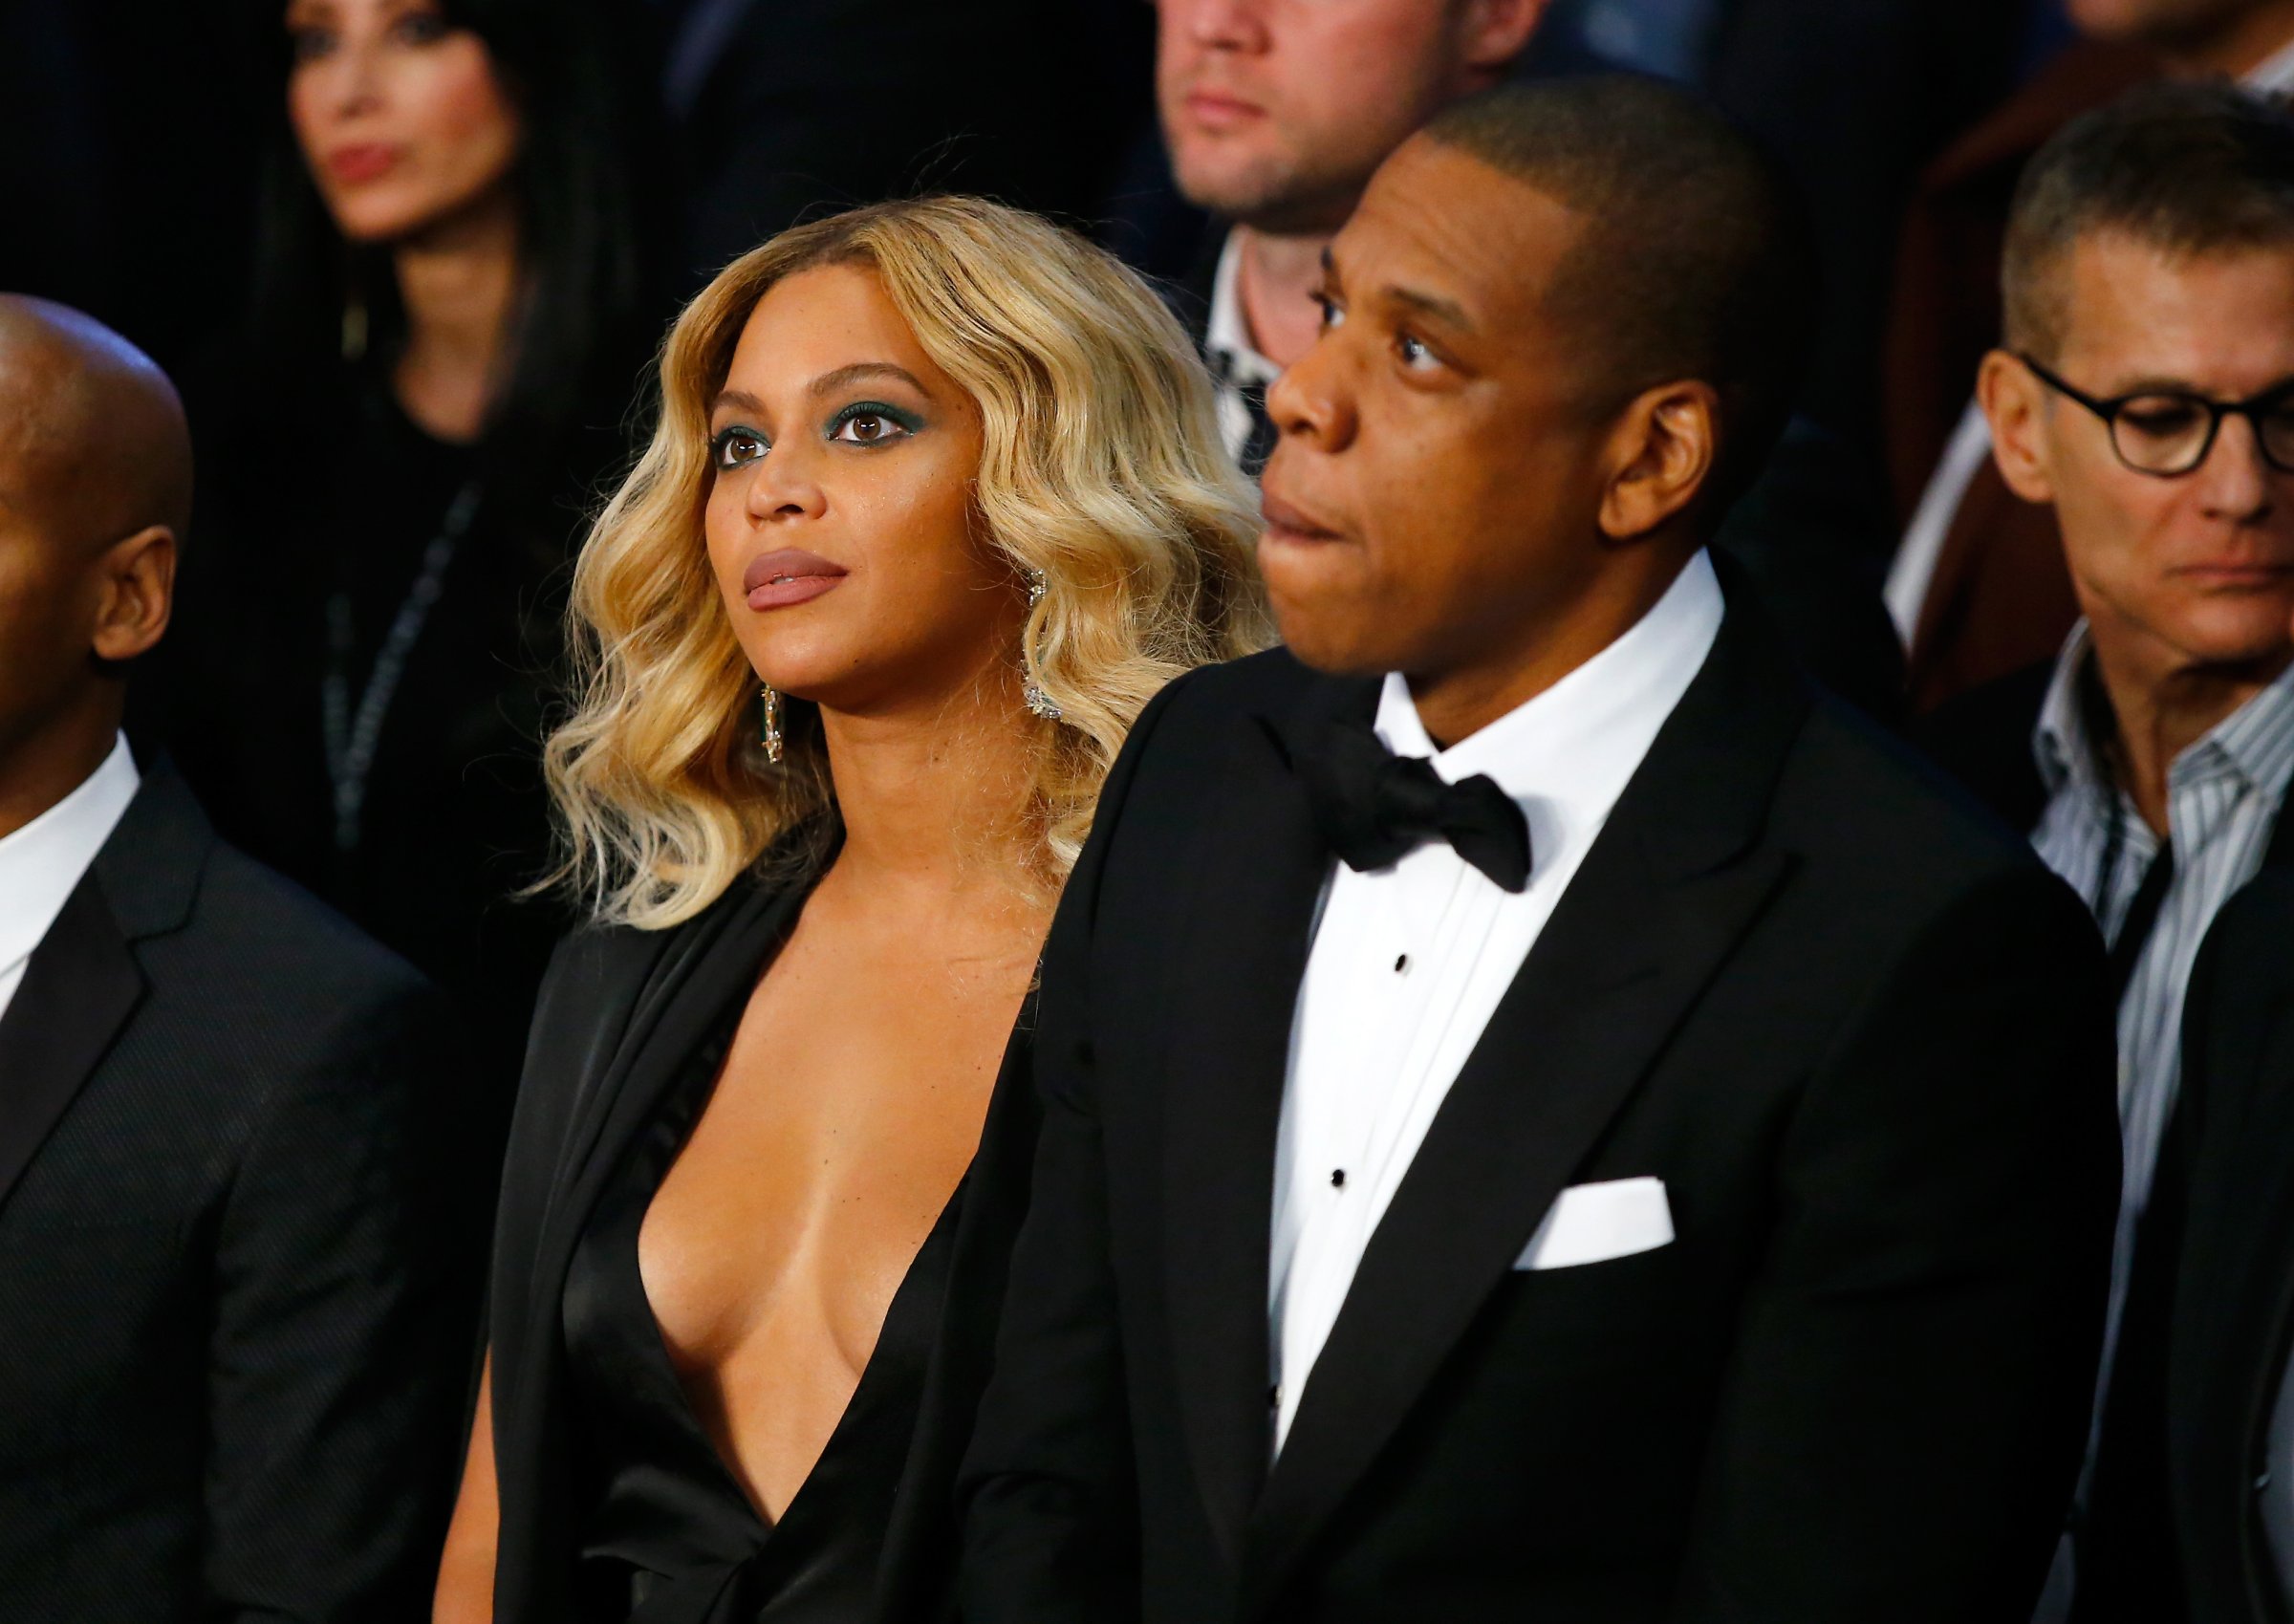 Beyonce Knowles and Jay-Z look on before Miguel Cotto takes on Canelo Alvarez in their middleweight fight at the Mandalay Bay Events Center on November 21, 2015 in Las Vegas, Nevada.